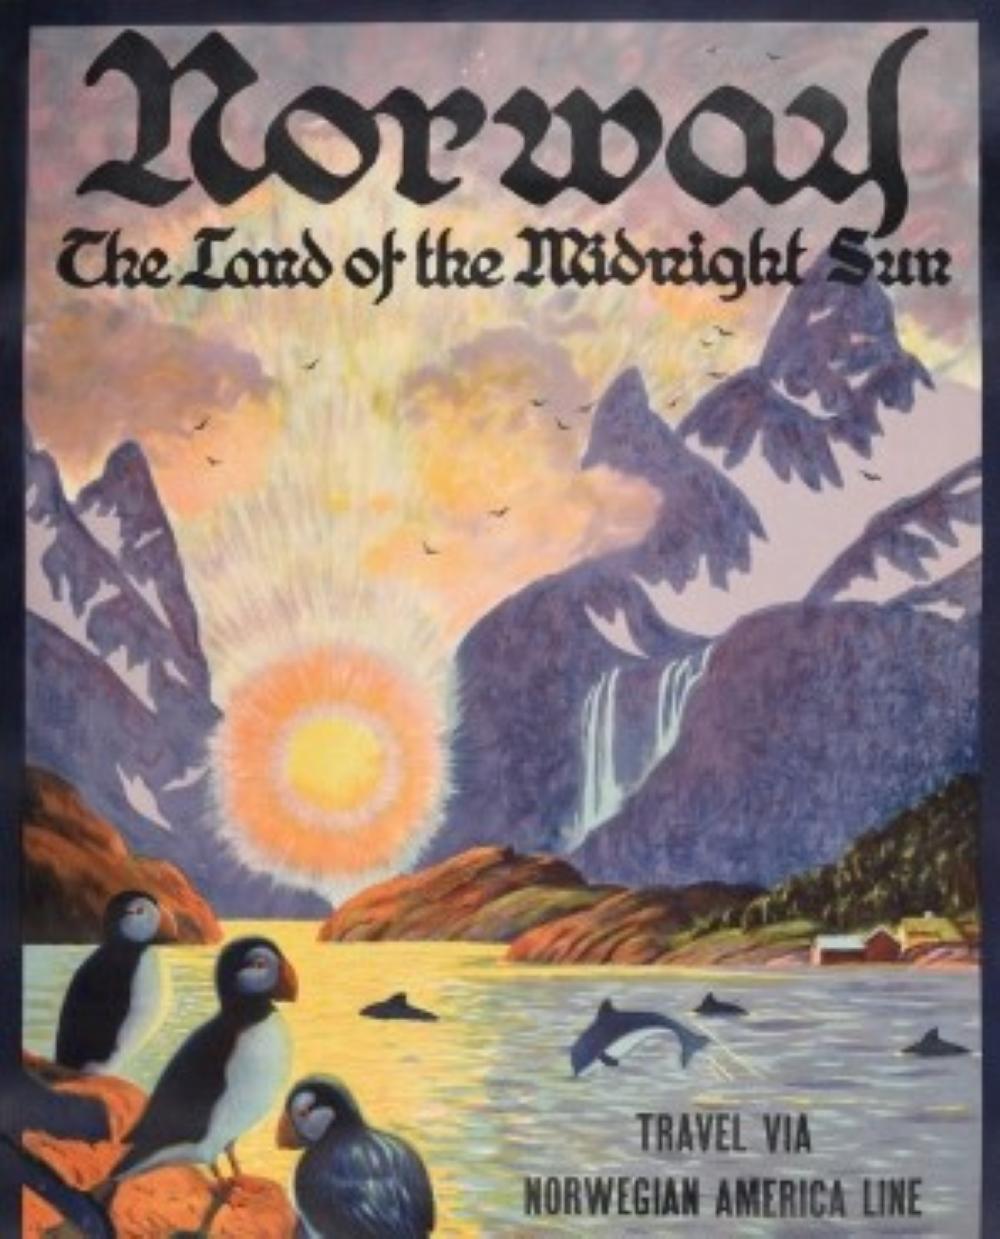 Original vintage travel poster for Norway The Land of the Midnight Sun Travel via Norwegian America Line featuring stunning artwork by Benjamin Blessum (1877-1954) depicting a scenic view of a Norwegian fjord with puffins on the rocks in the